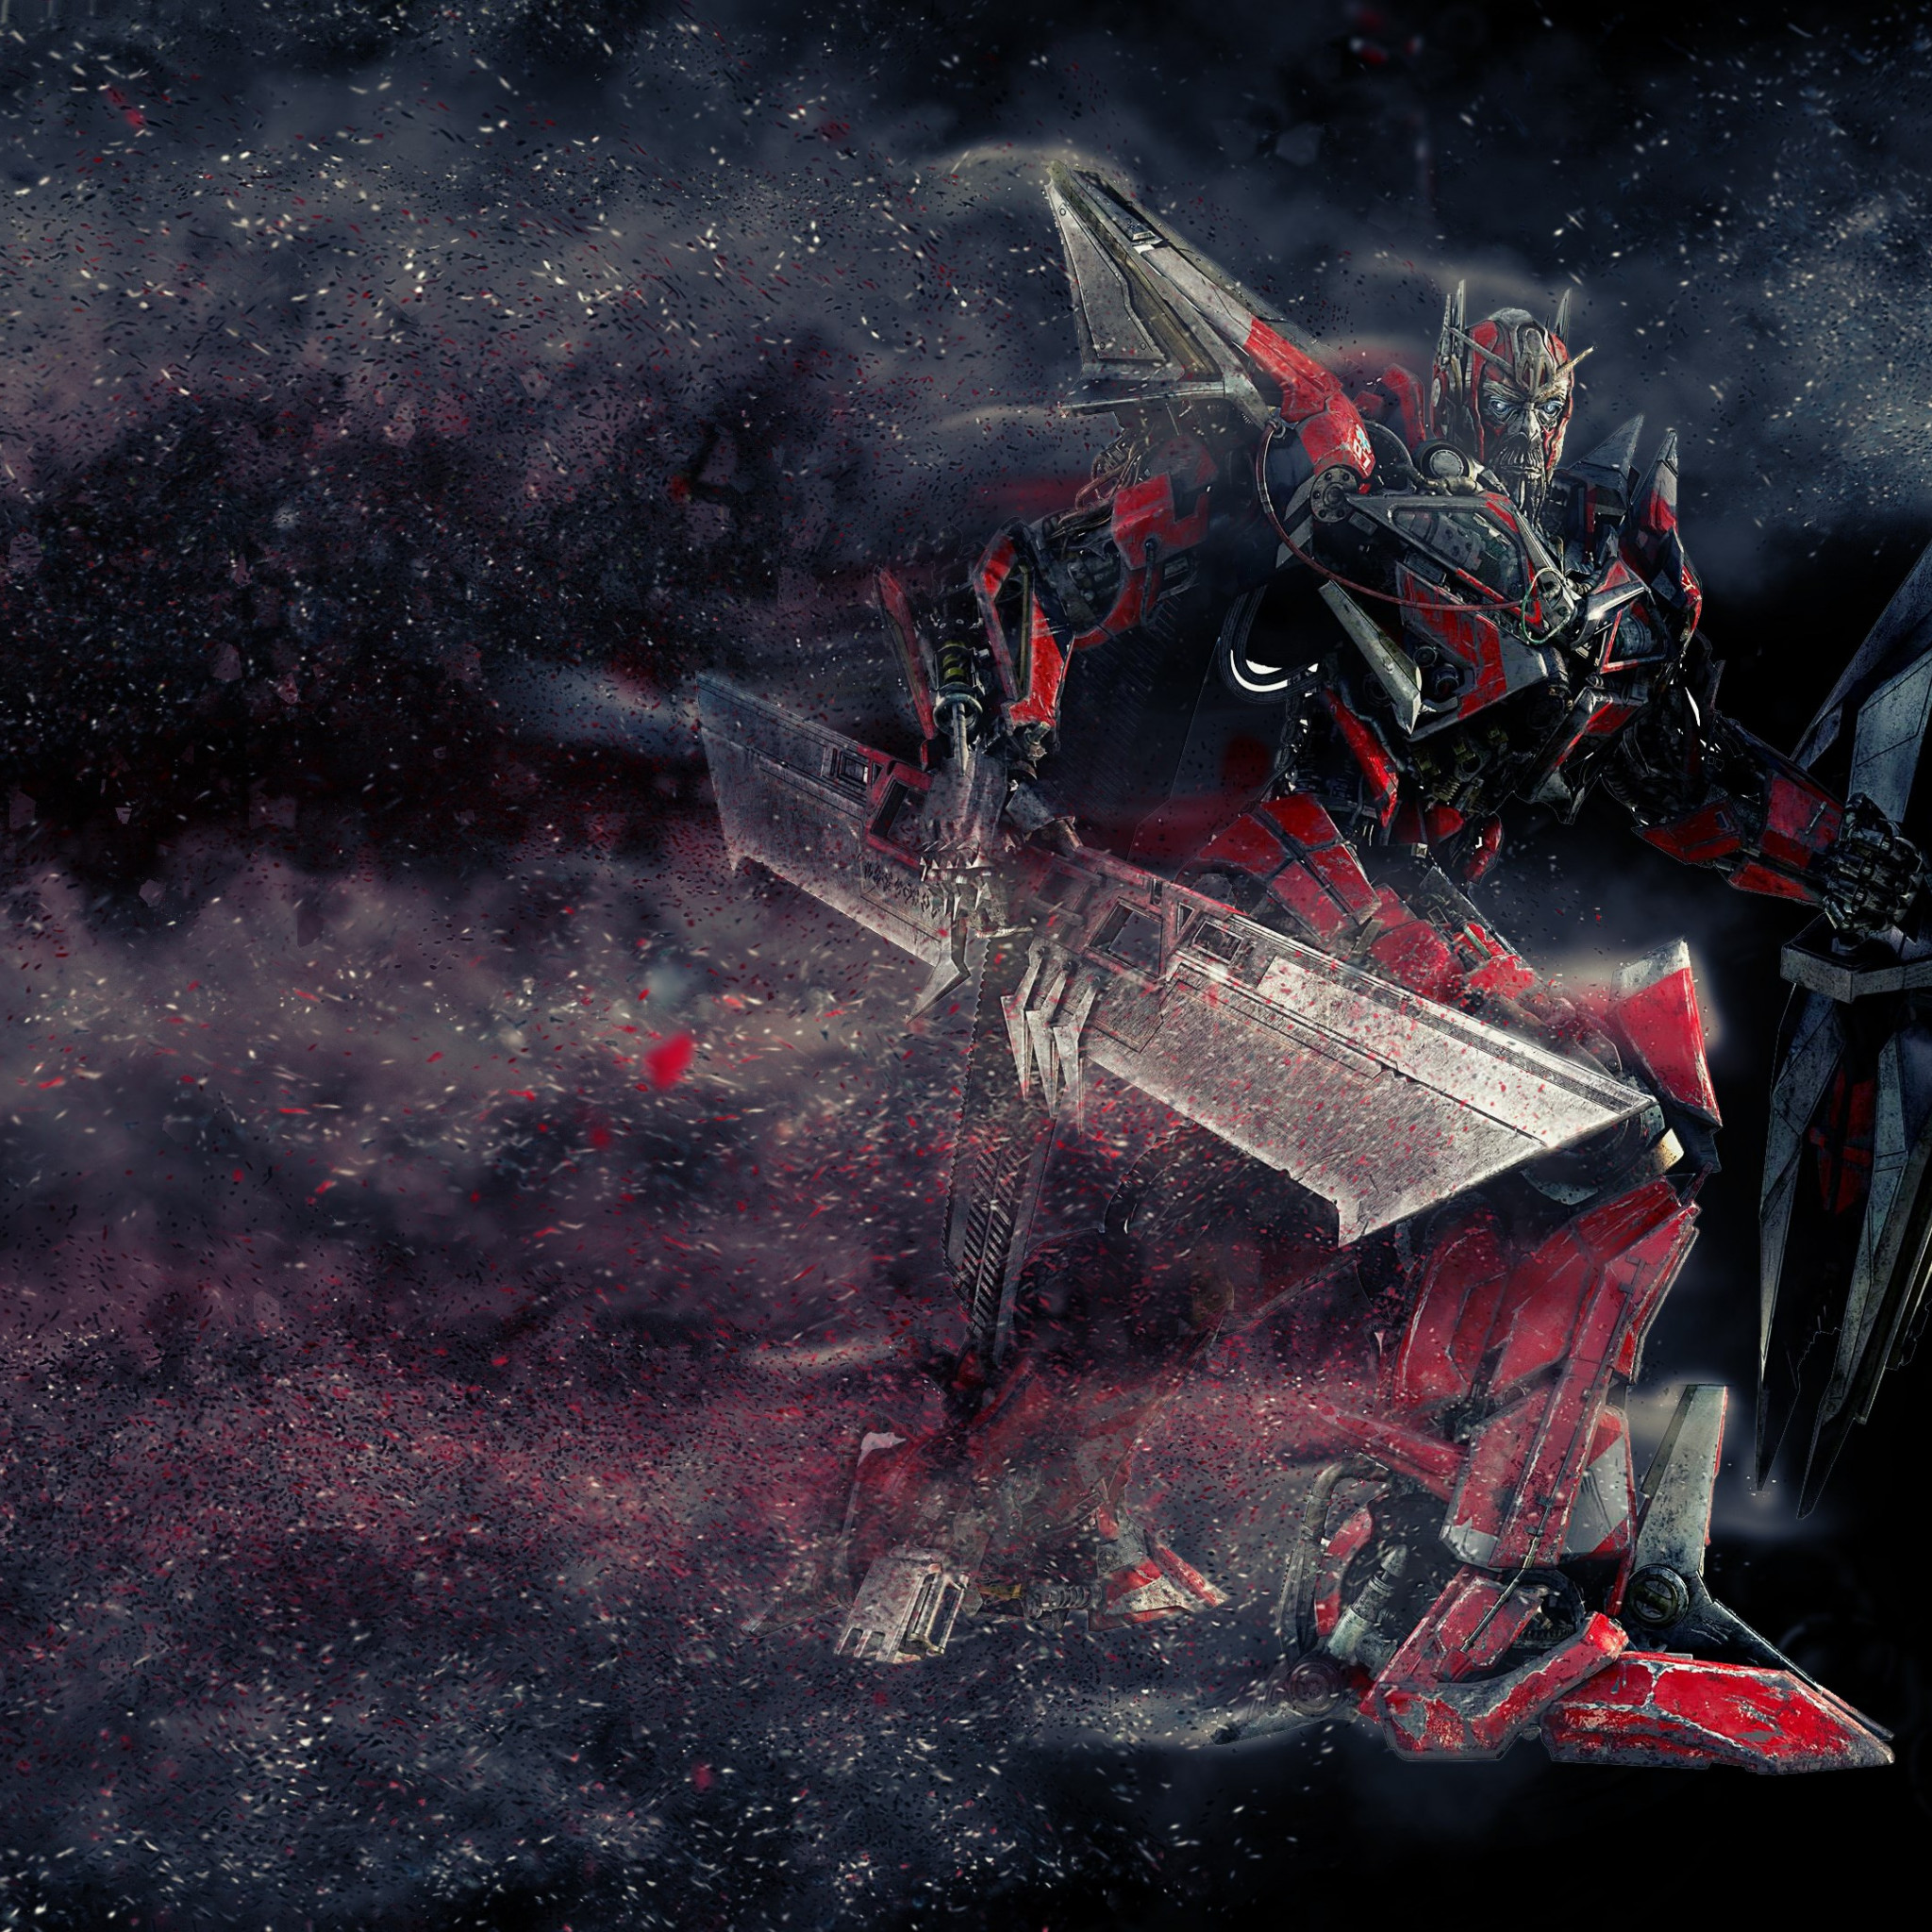 Sentinel Prime from Transformers wallpaper 2048x2048